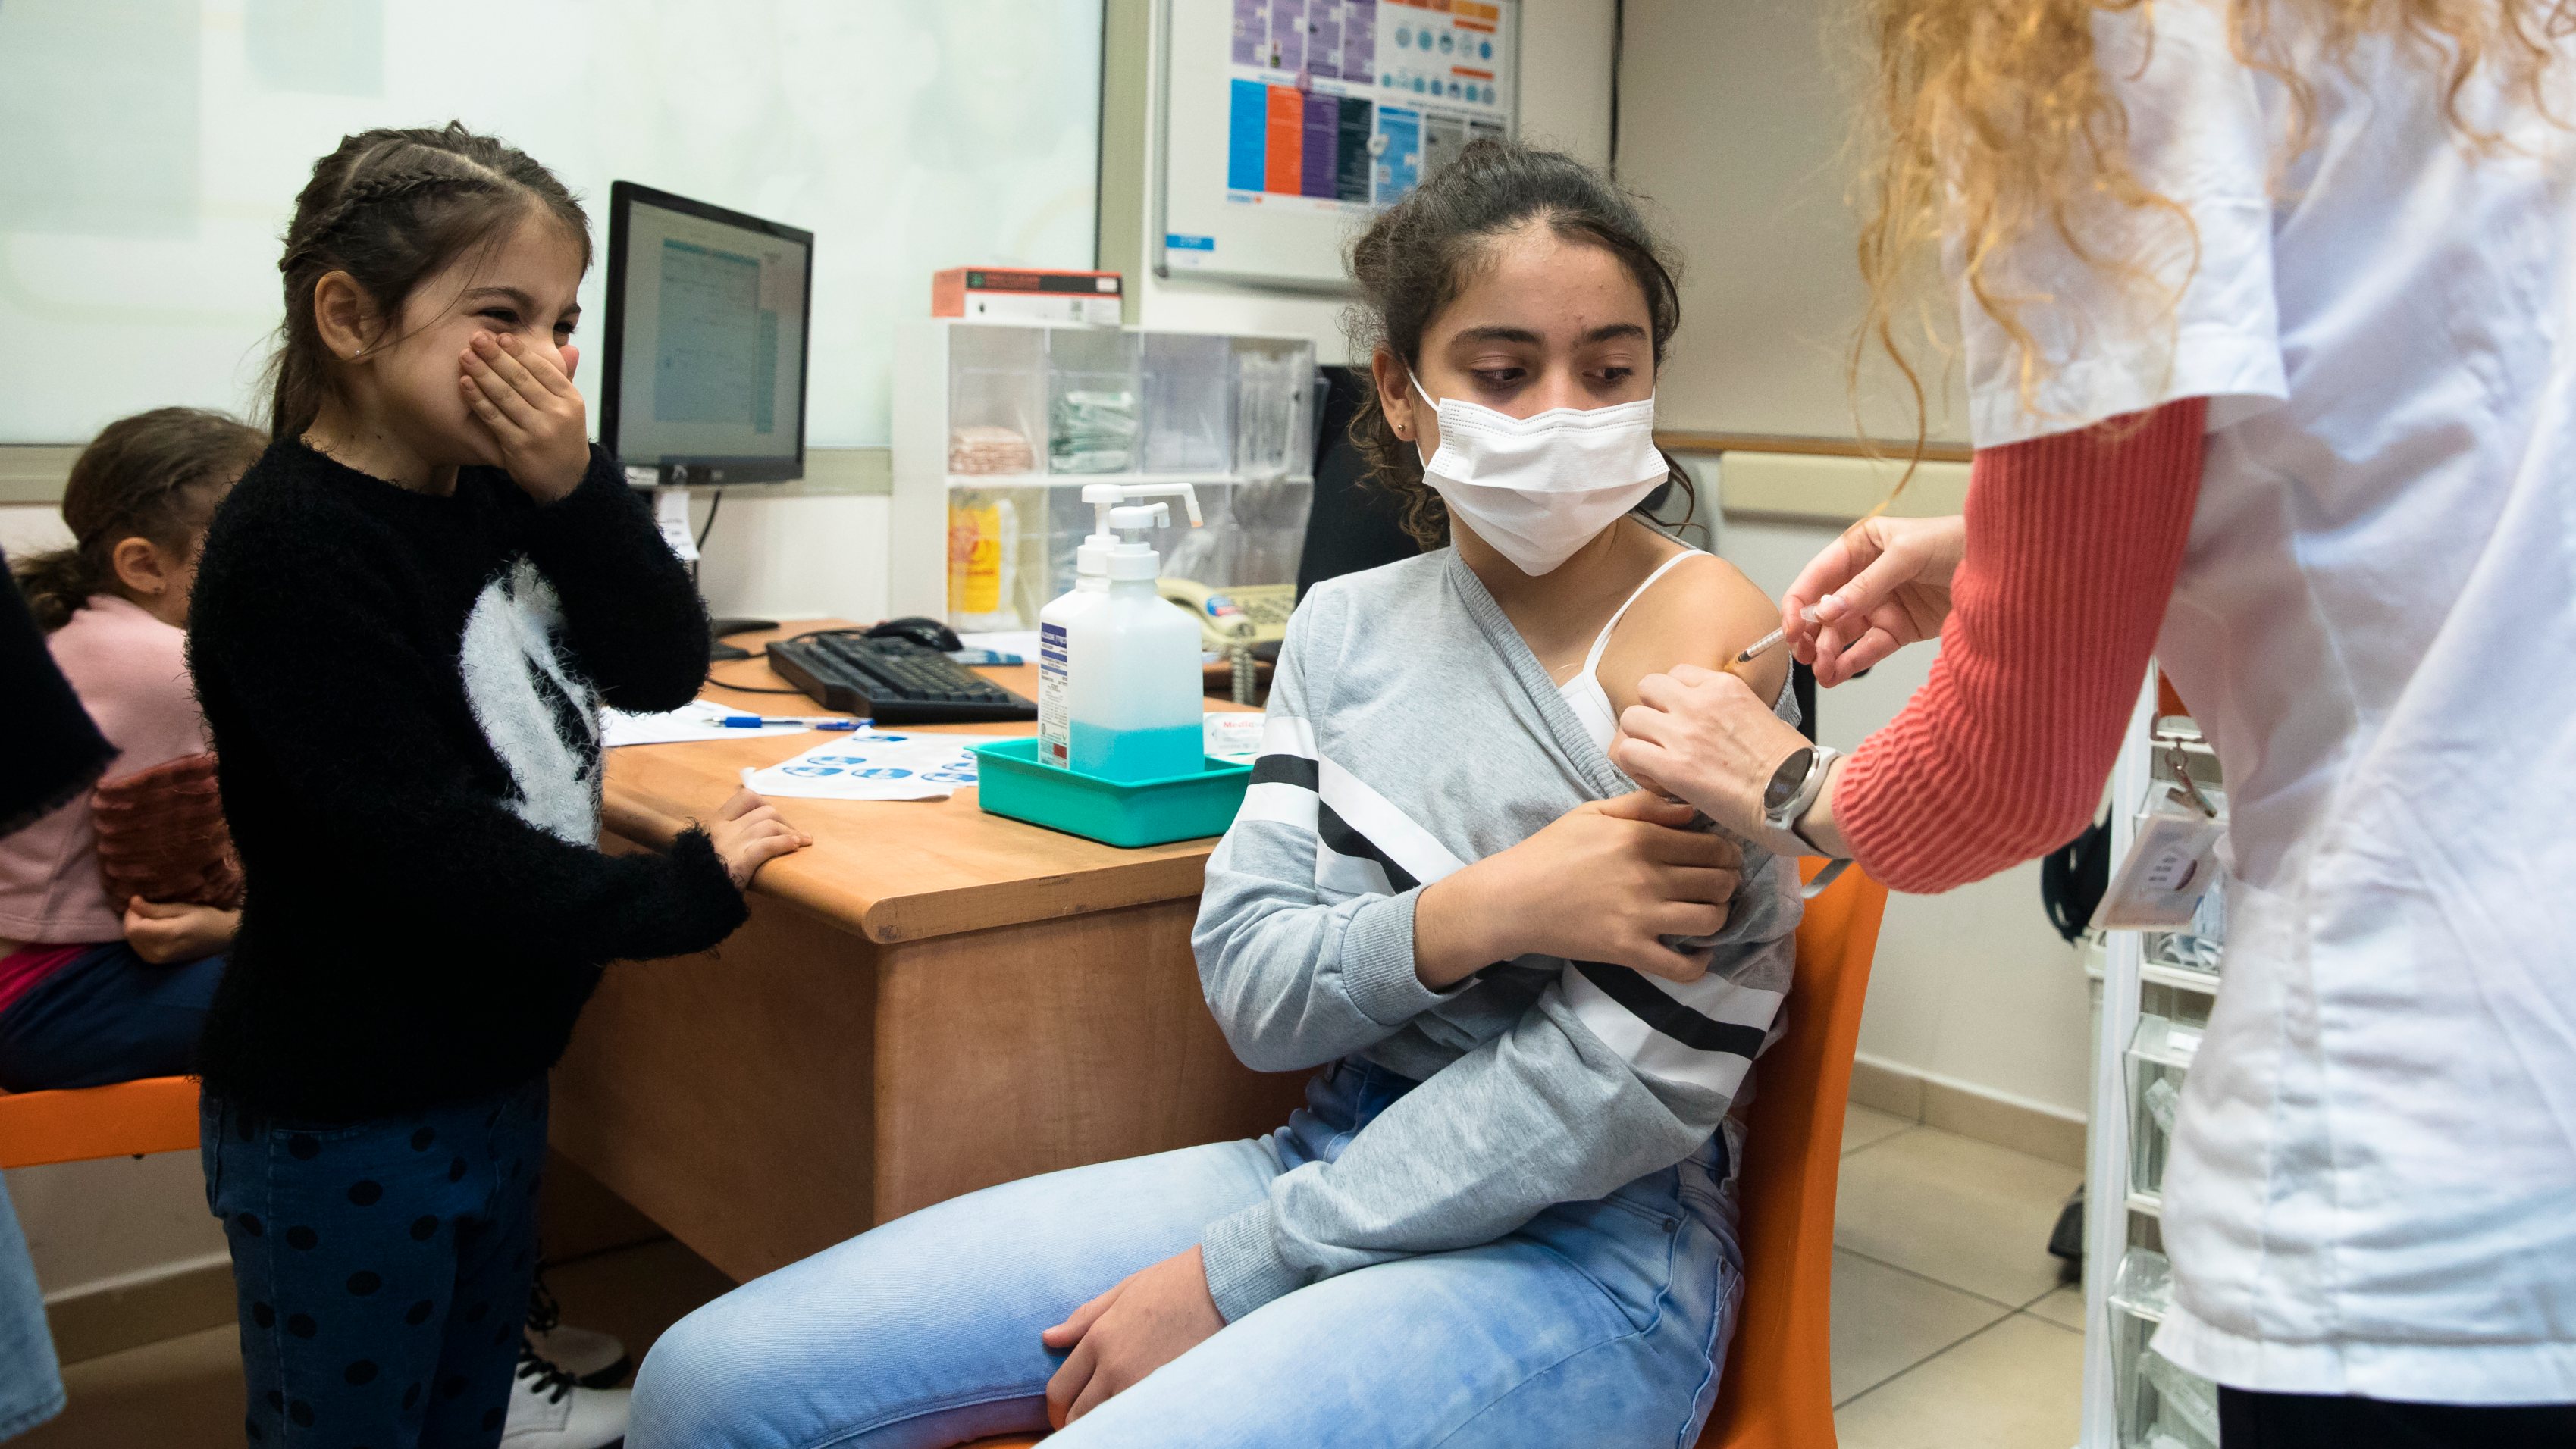 Israel Starts Vaccinating Children Under 12 For Covid-19